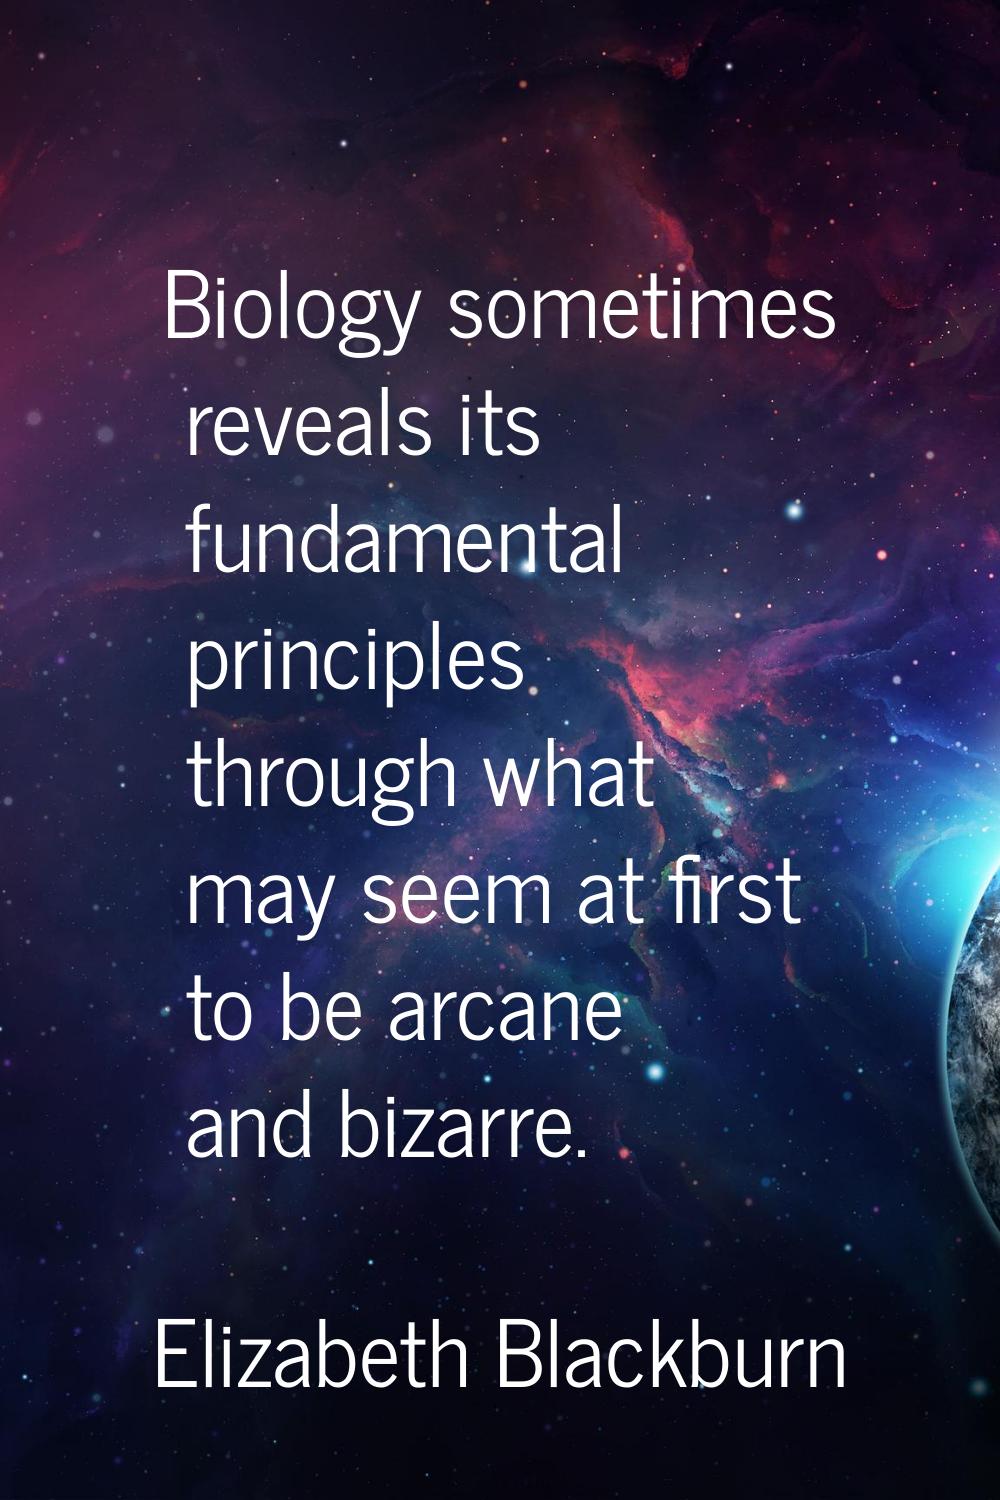 Biology sometimes reveals its fundamental principles through what may seem at first to be arcane an